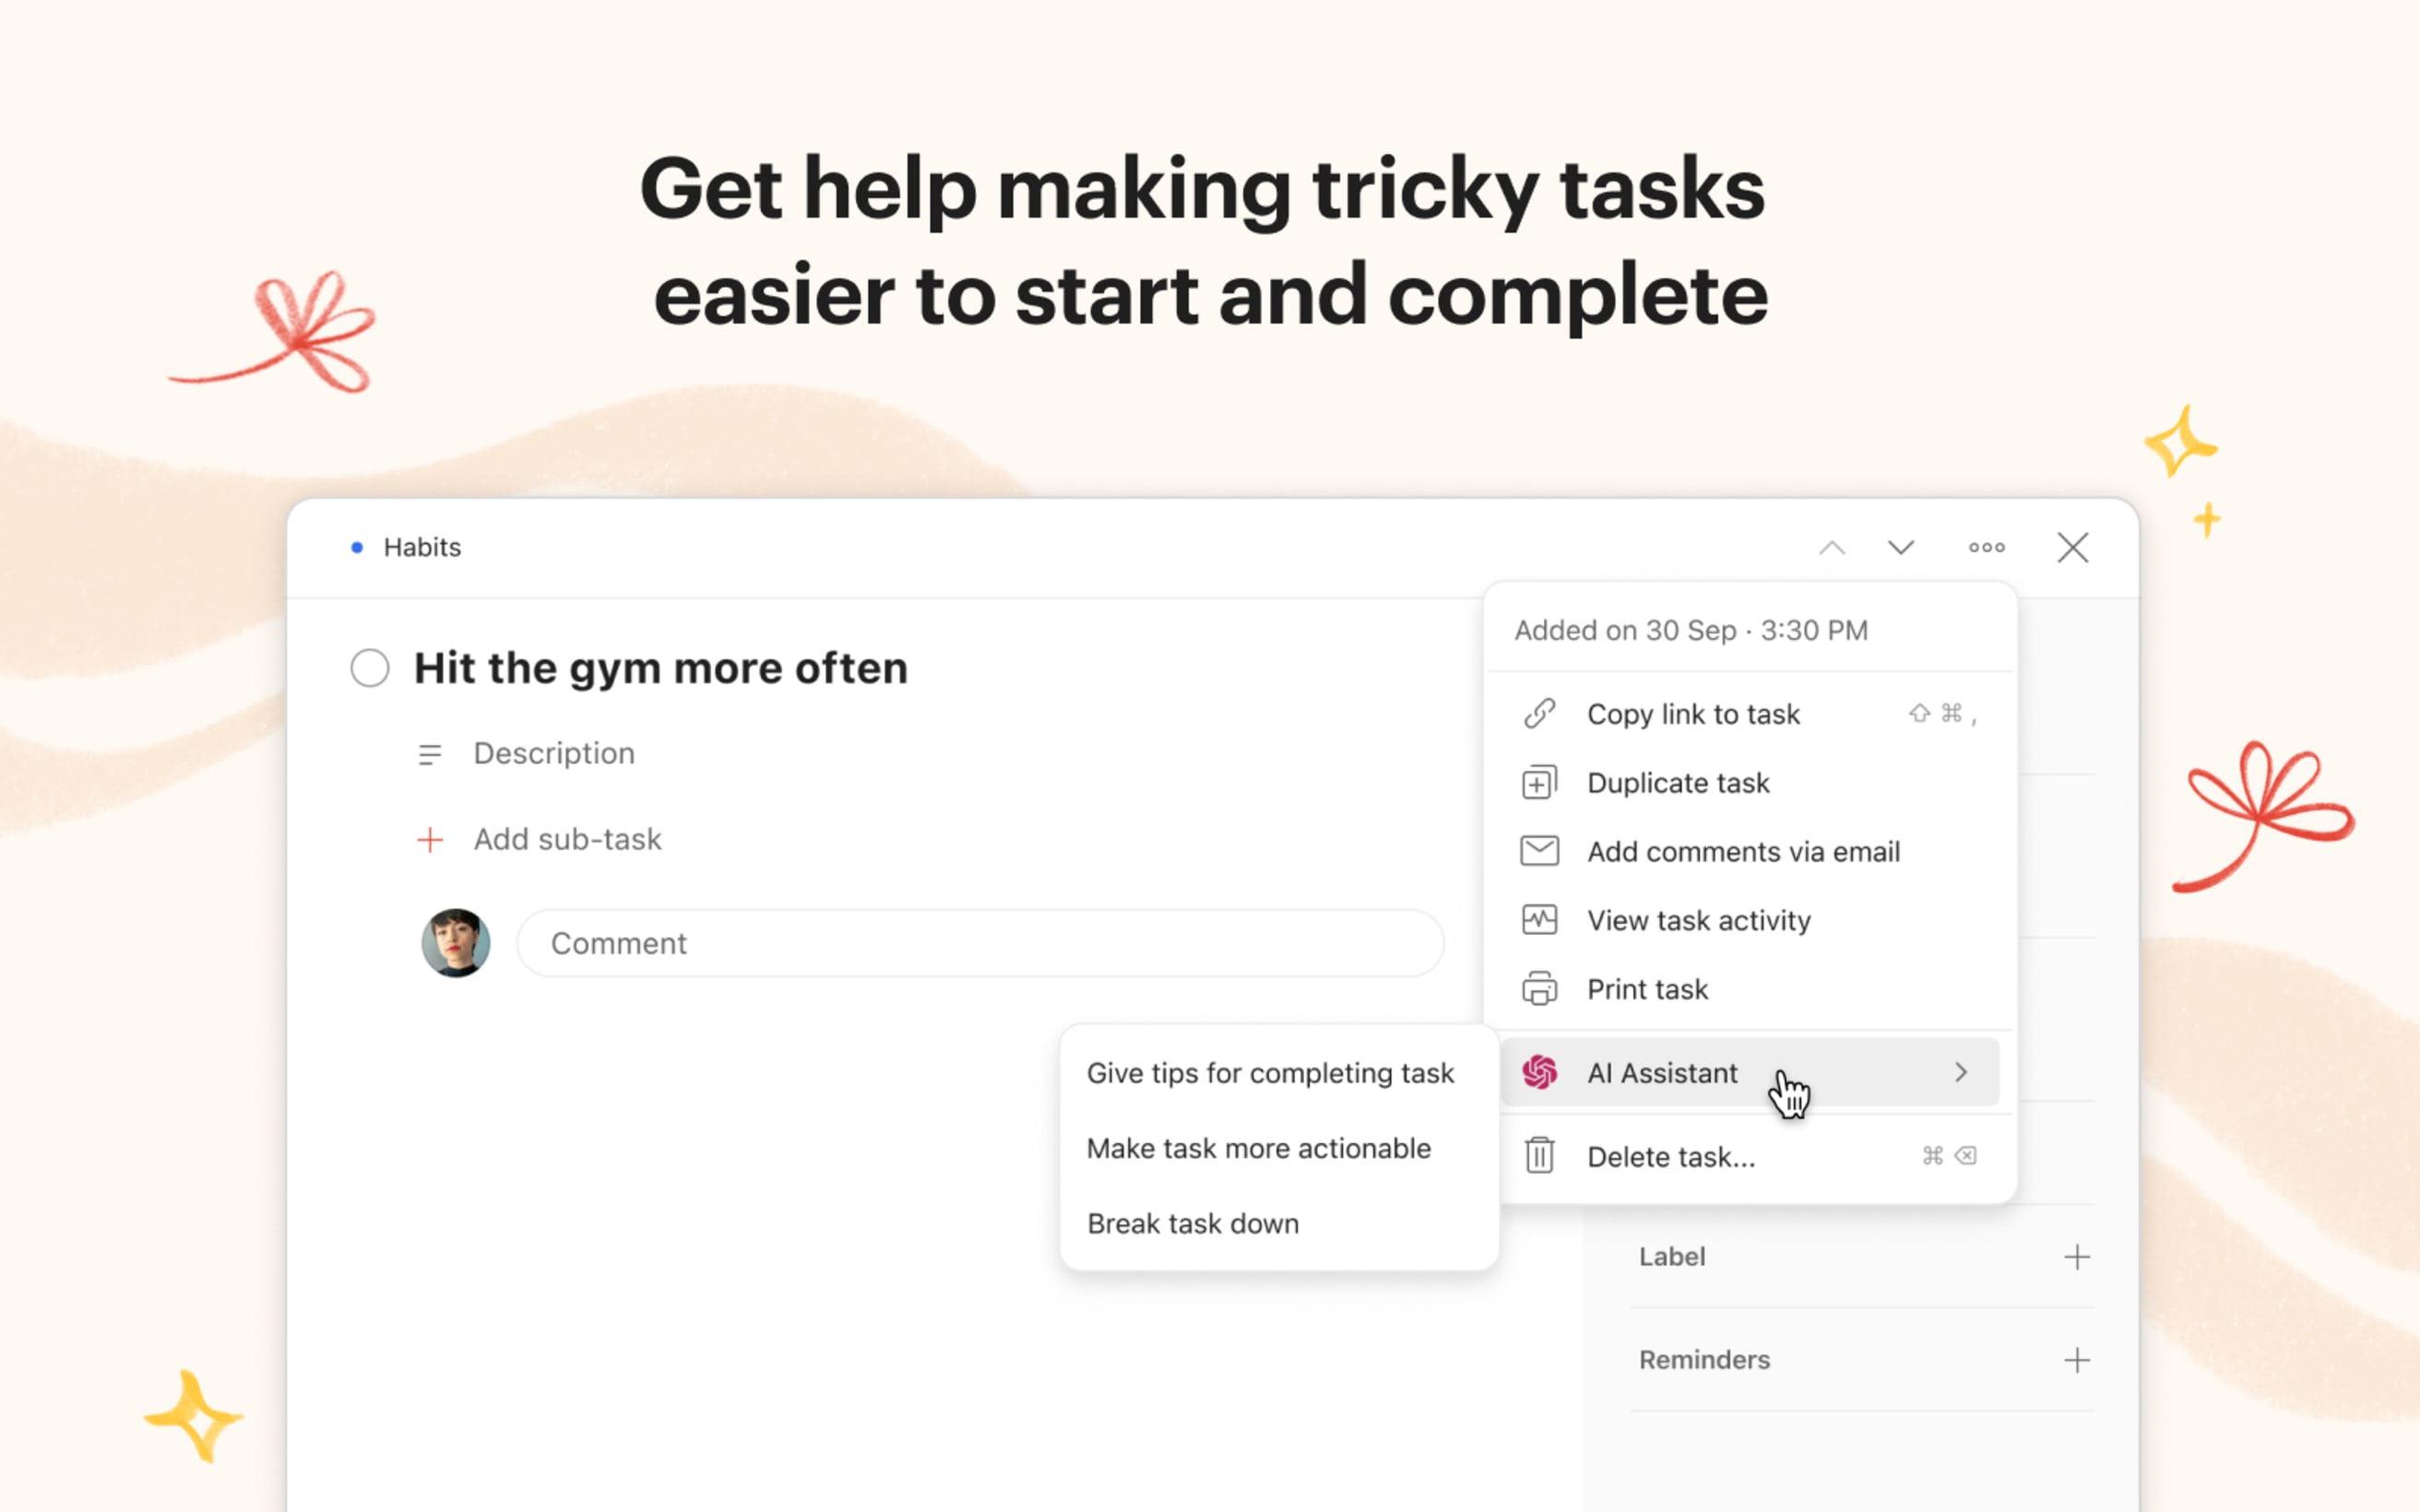 AI Assistant - Get help making tasks easier to start and complete